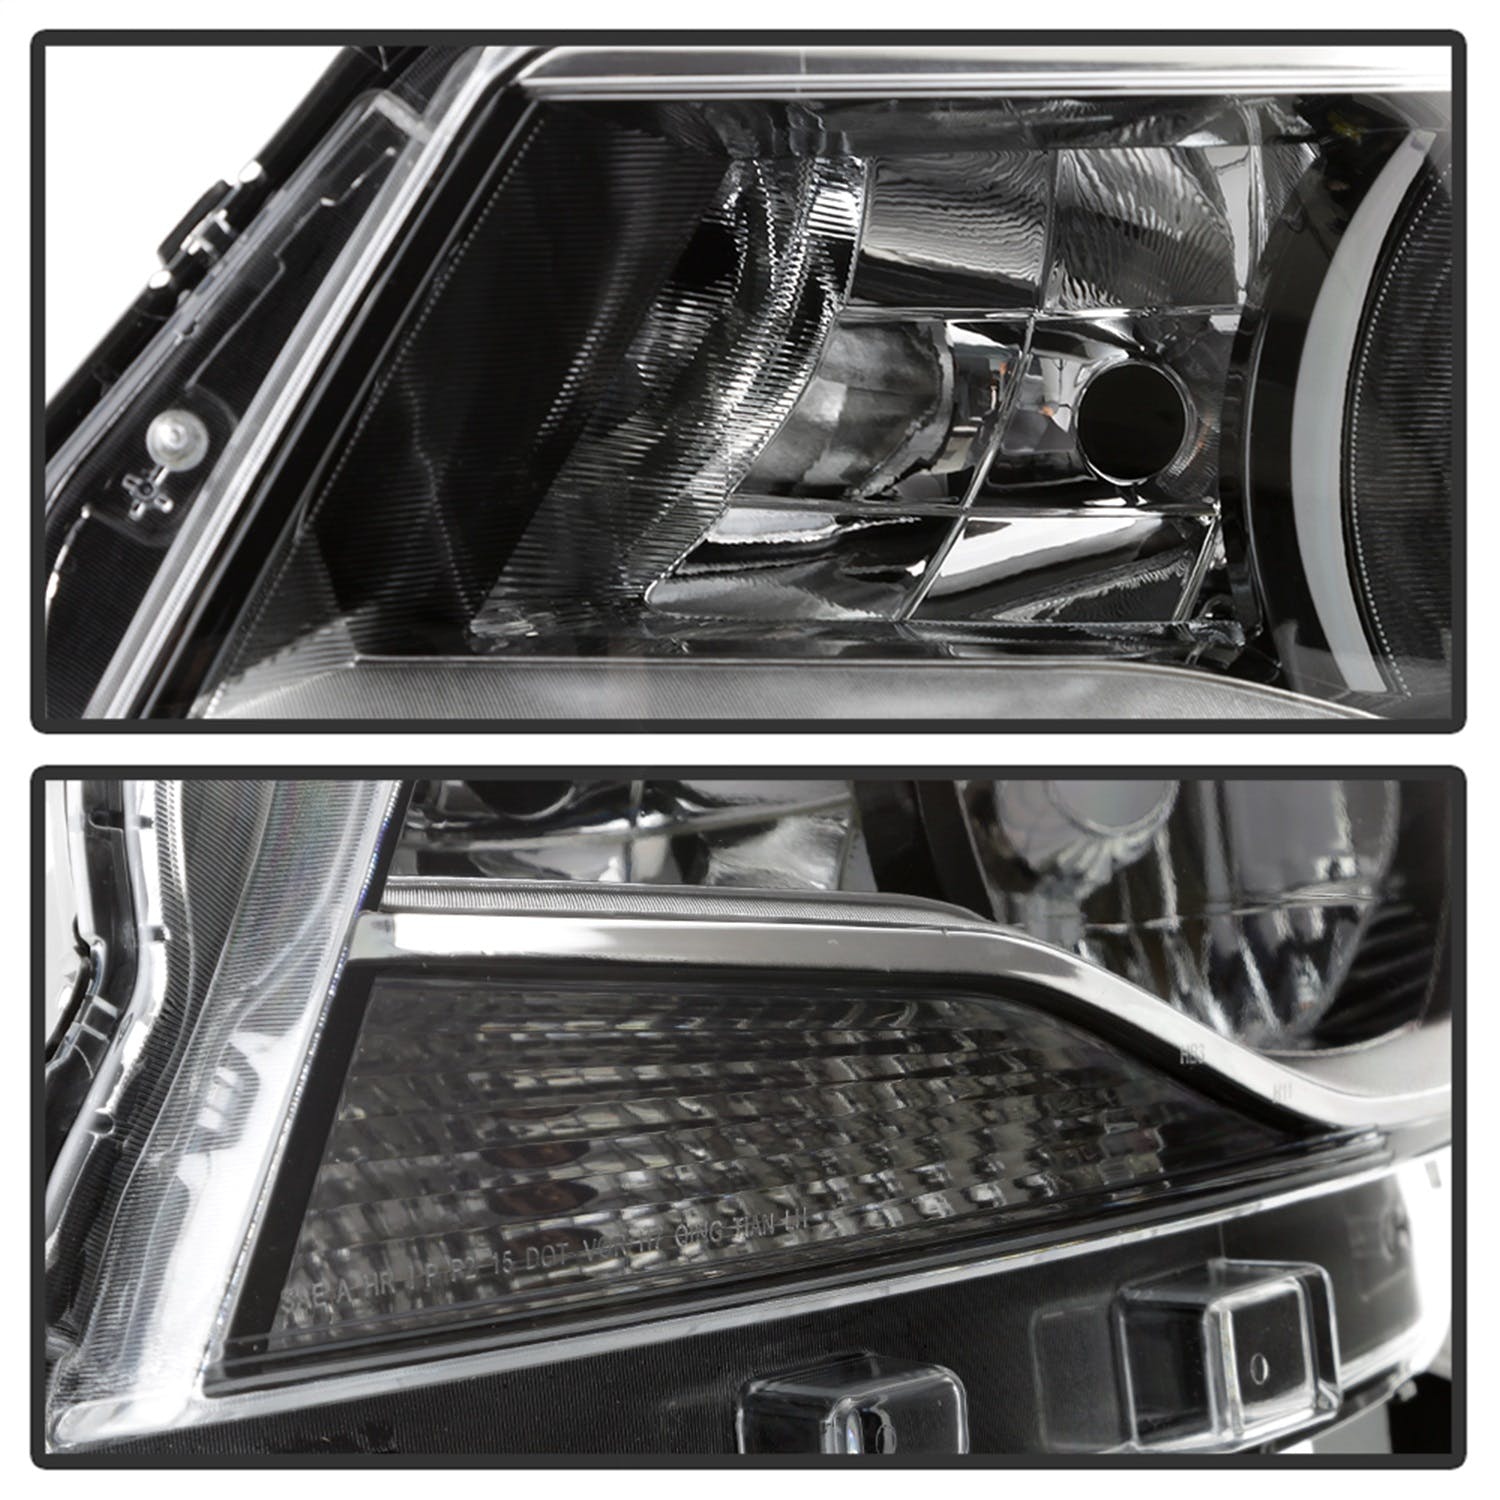 XTUNE POWER 9040535 Chevy Colorado 2015 2021 Halogen Models Only ( Does Not fit Xenon HID and Projector Models ) Driver Side Headlights Low Beam H11(Included) ; High Beam 9005(Included) ; Signal 7444NA(Not Included) OEM Left